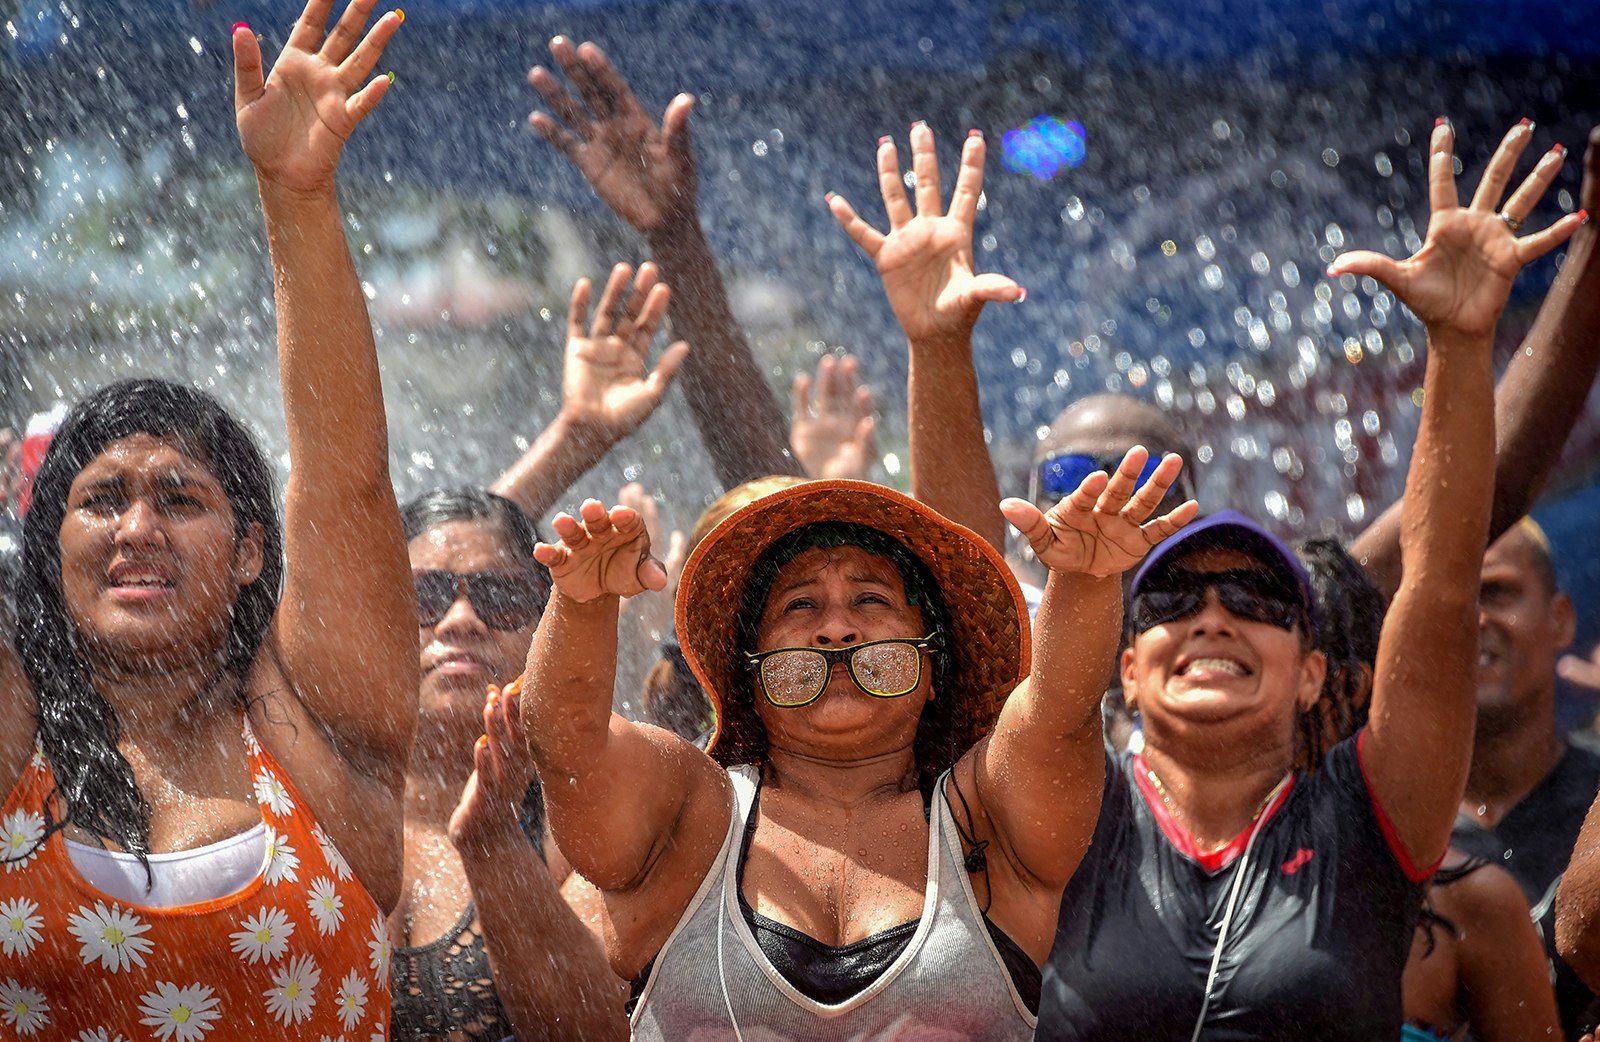 A group of women with their hands in the air get showered with water